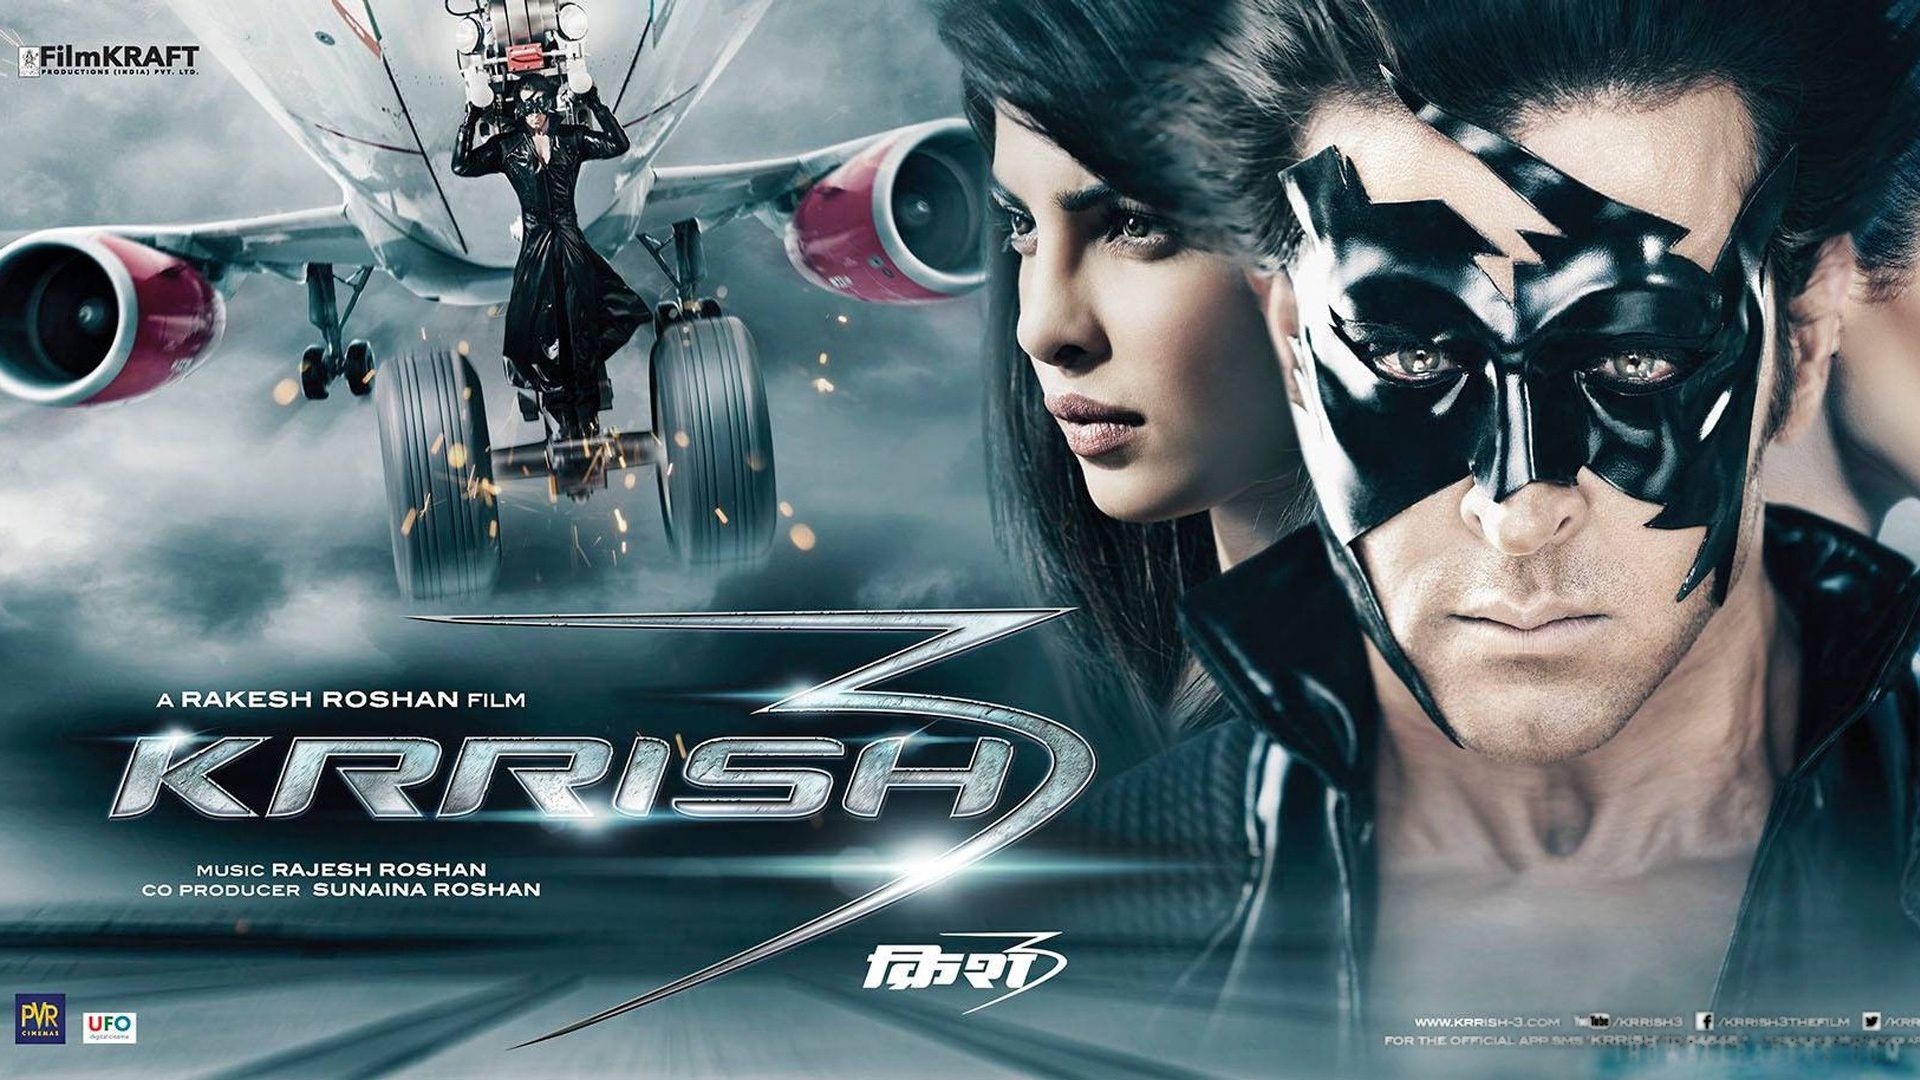 Krrish 3 Wallpaper. Krrish 3 Wallpaper, Krrish 3 Background and